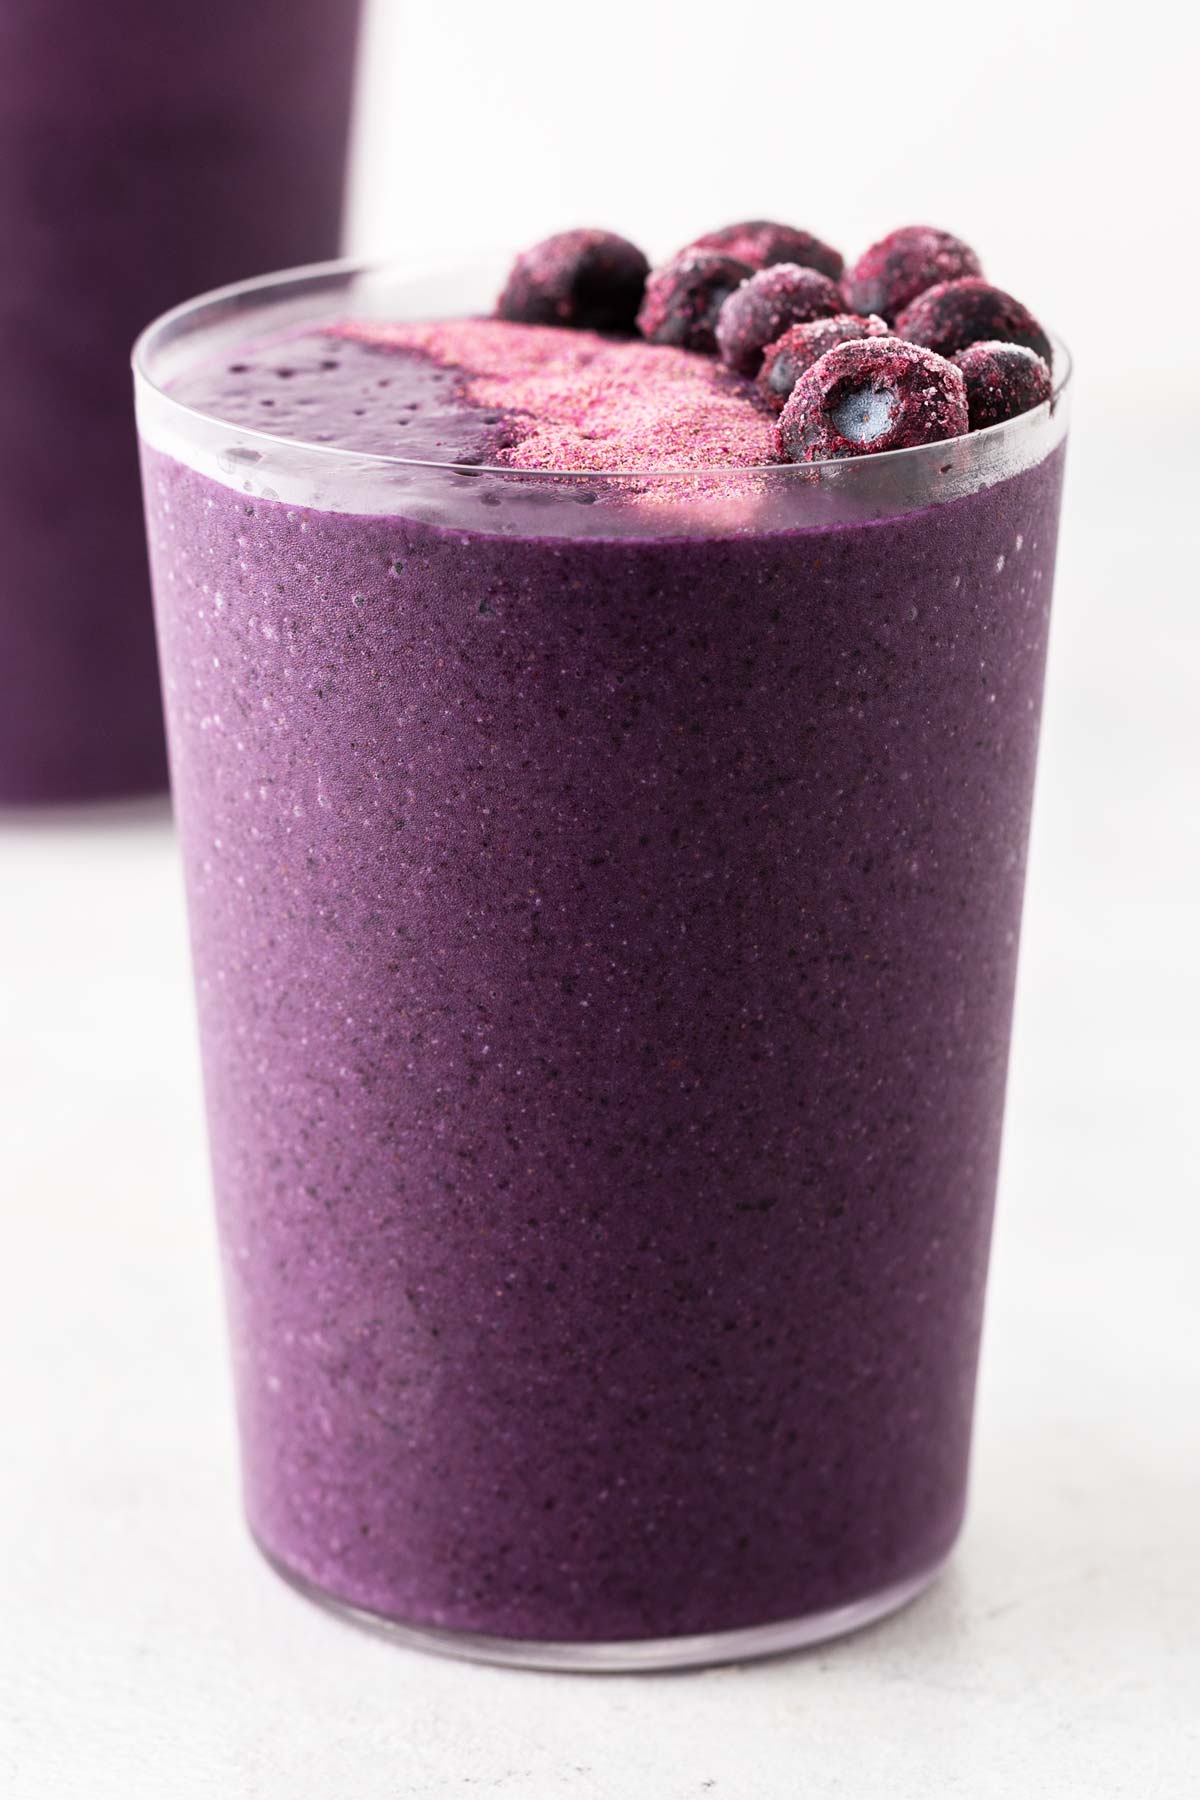 Purple Sweet Potato Smoothie in a glass with frozen blueberry garnish.